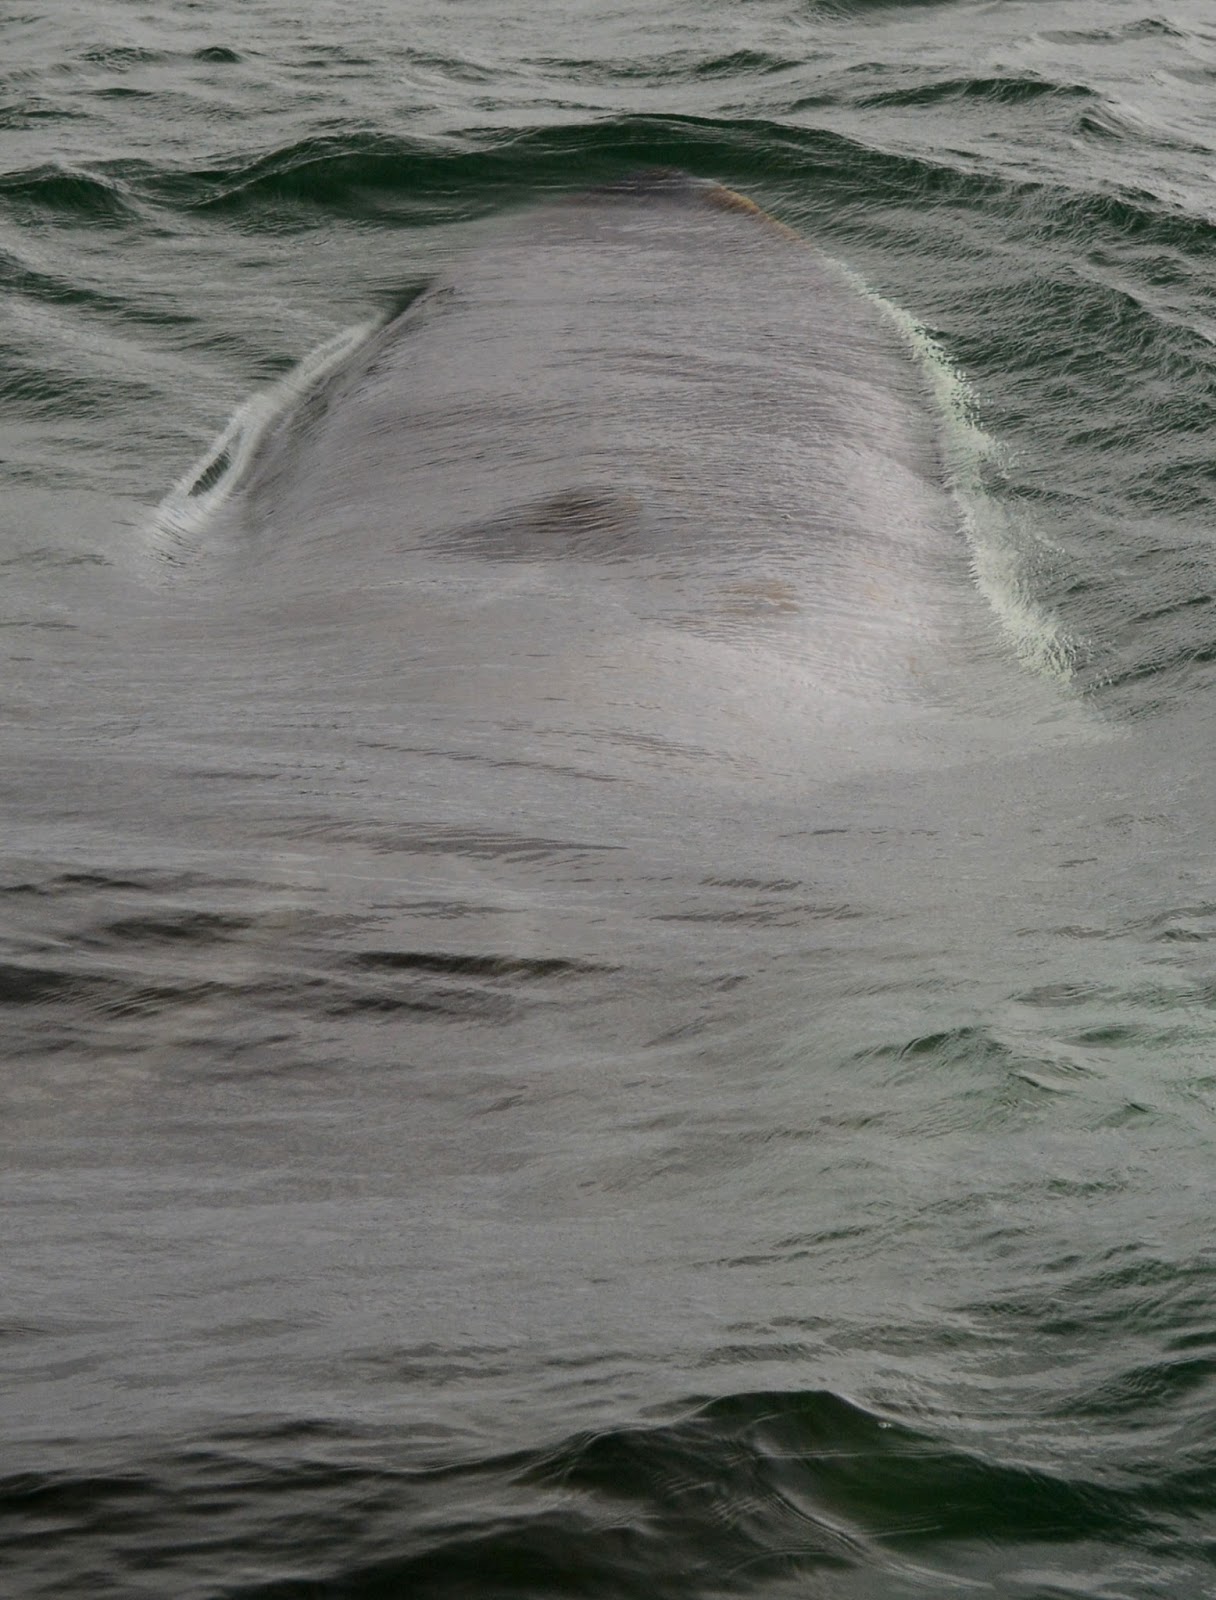 Quoddy Link Marine - Sightings and Updates: Fin whales, Fin whales ...
